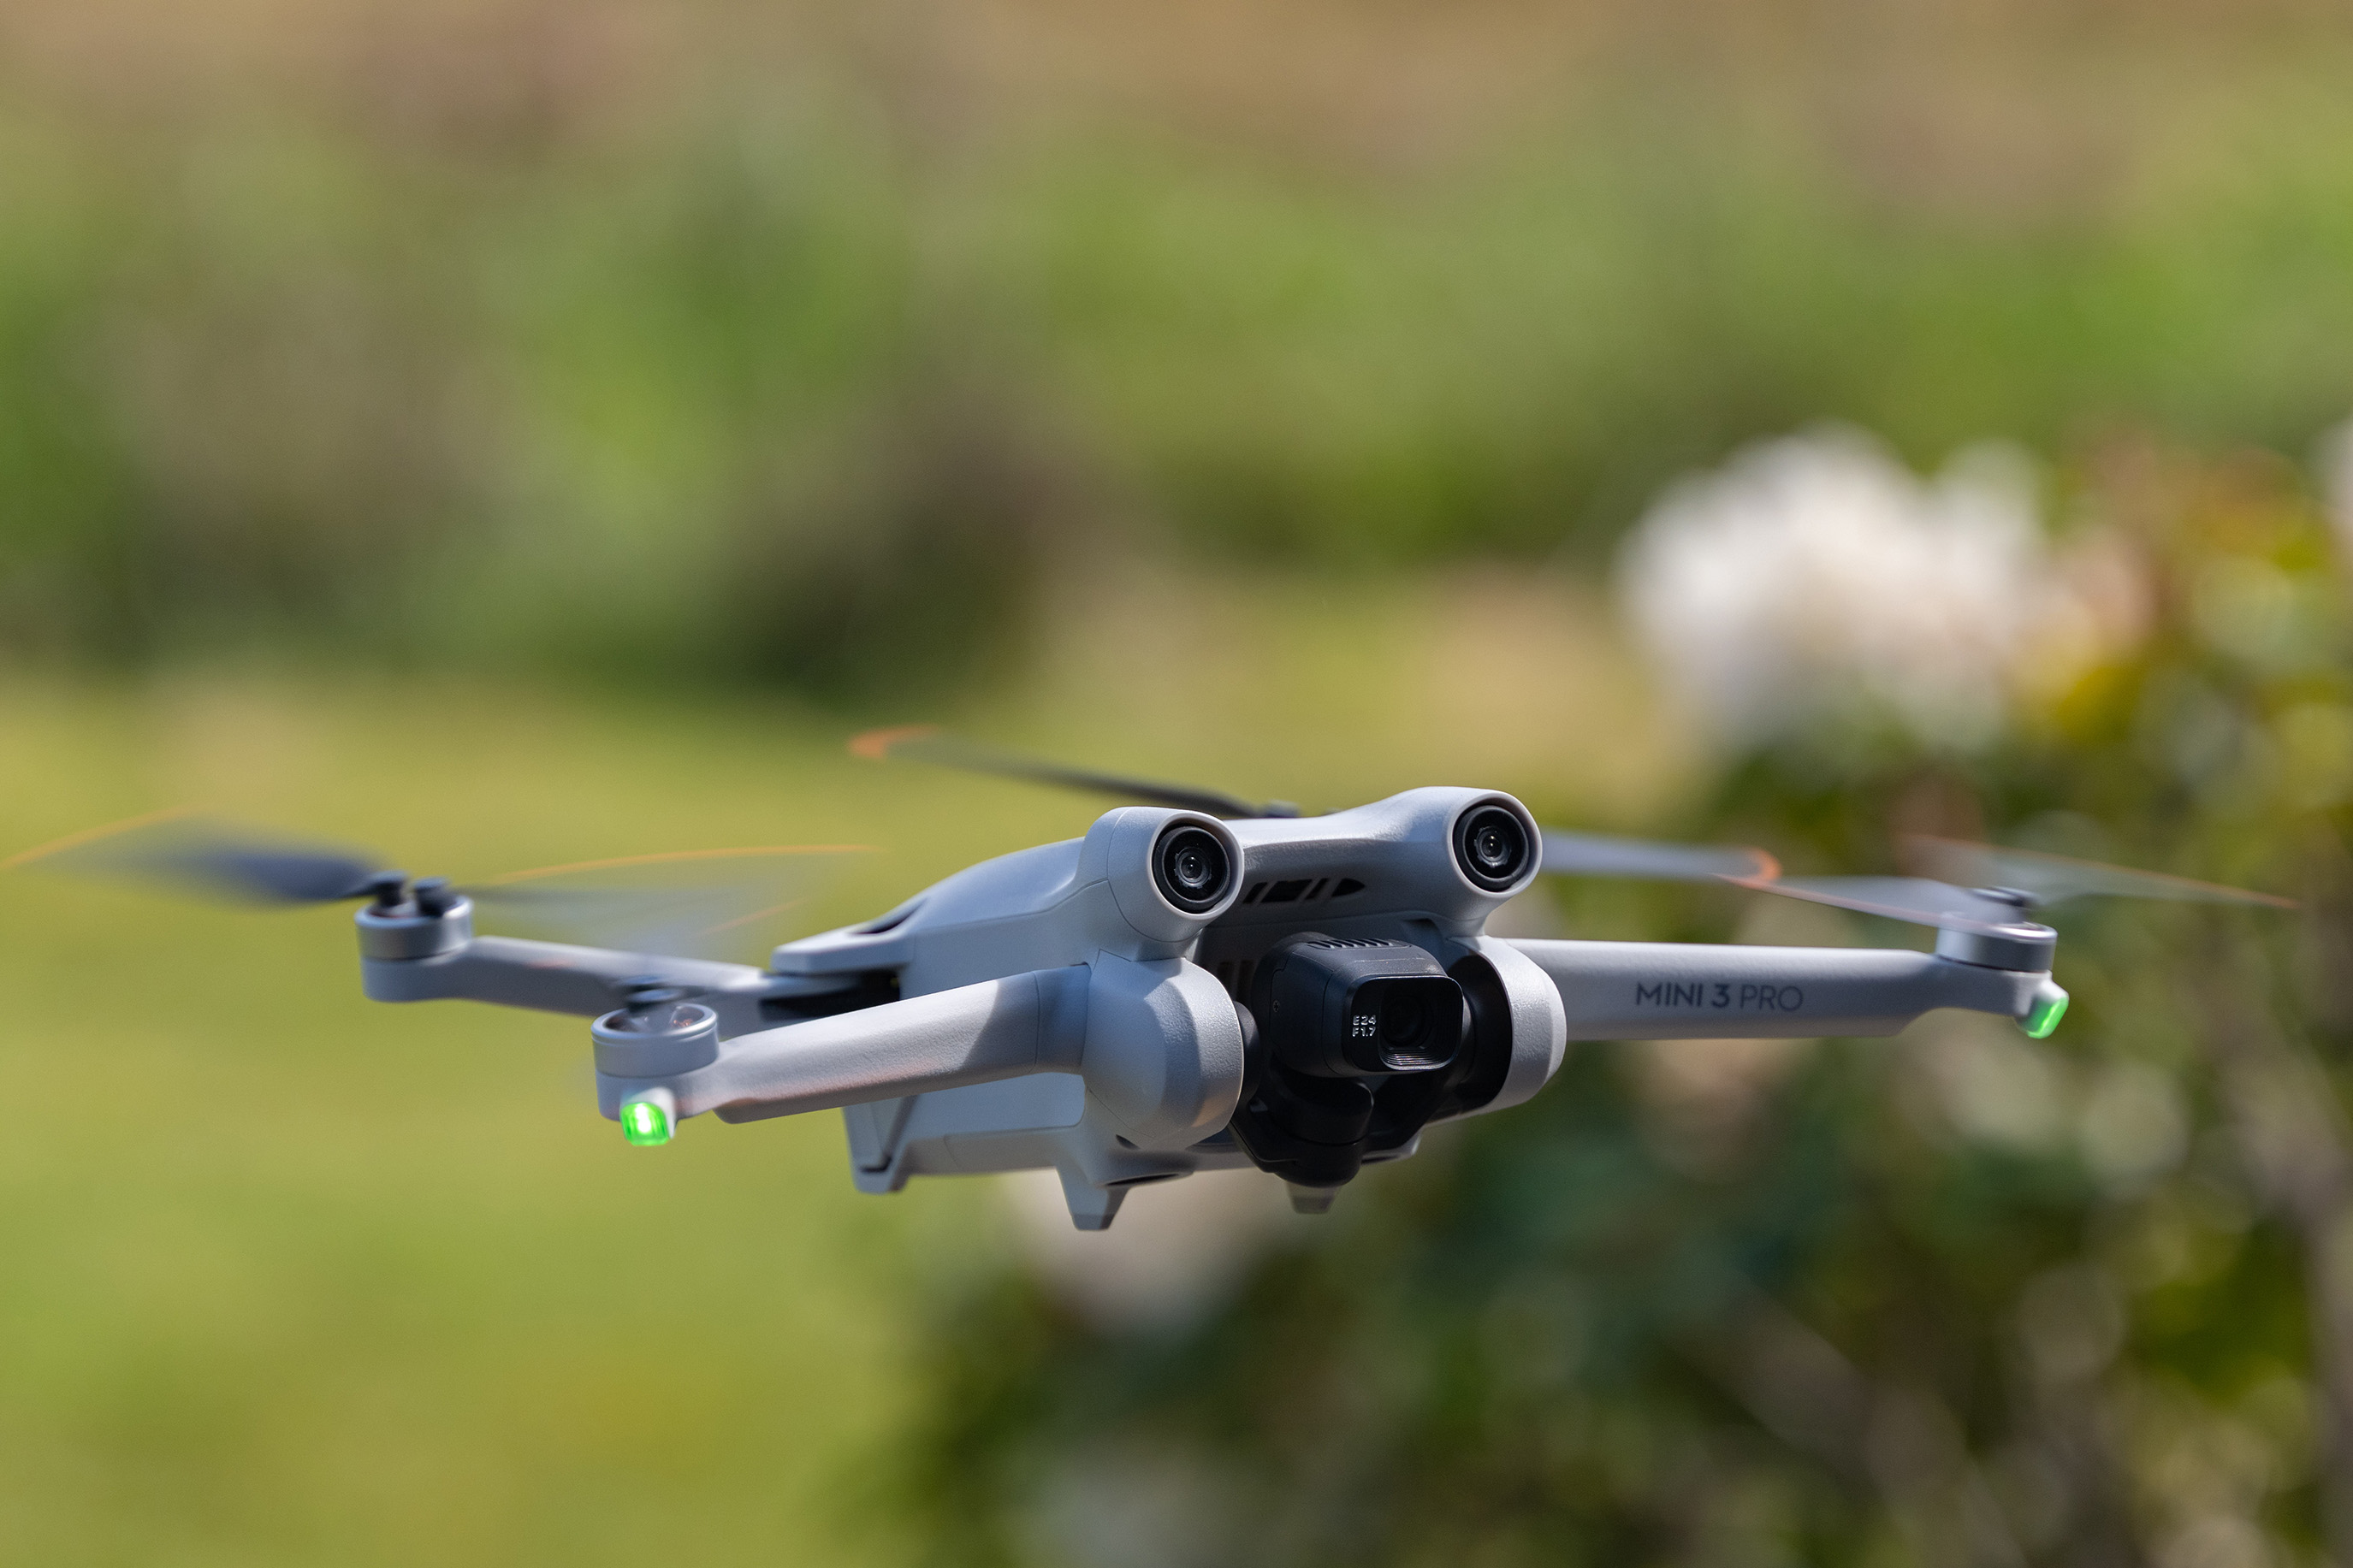 Best Drone Deals: Get a Drone for | $49 Trends More Cheap and Digital